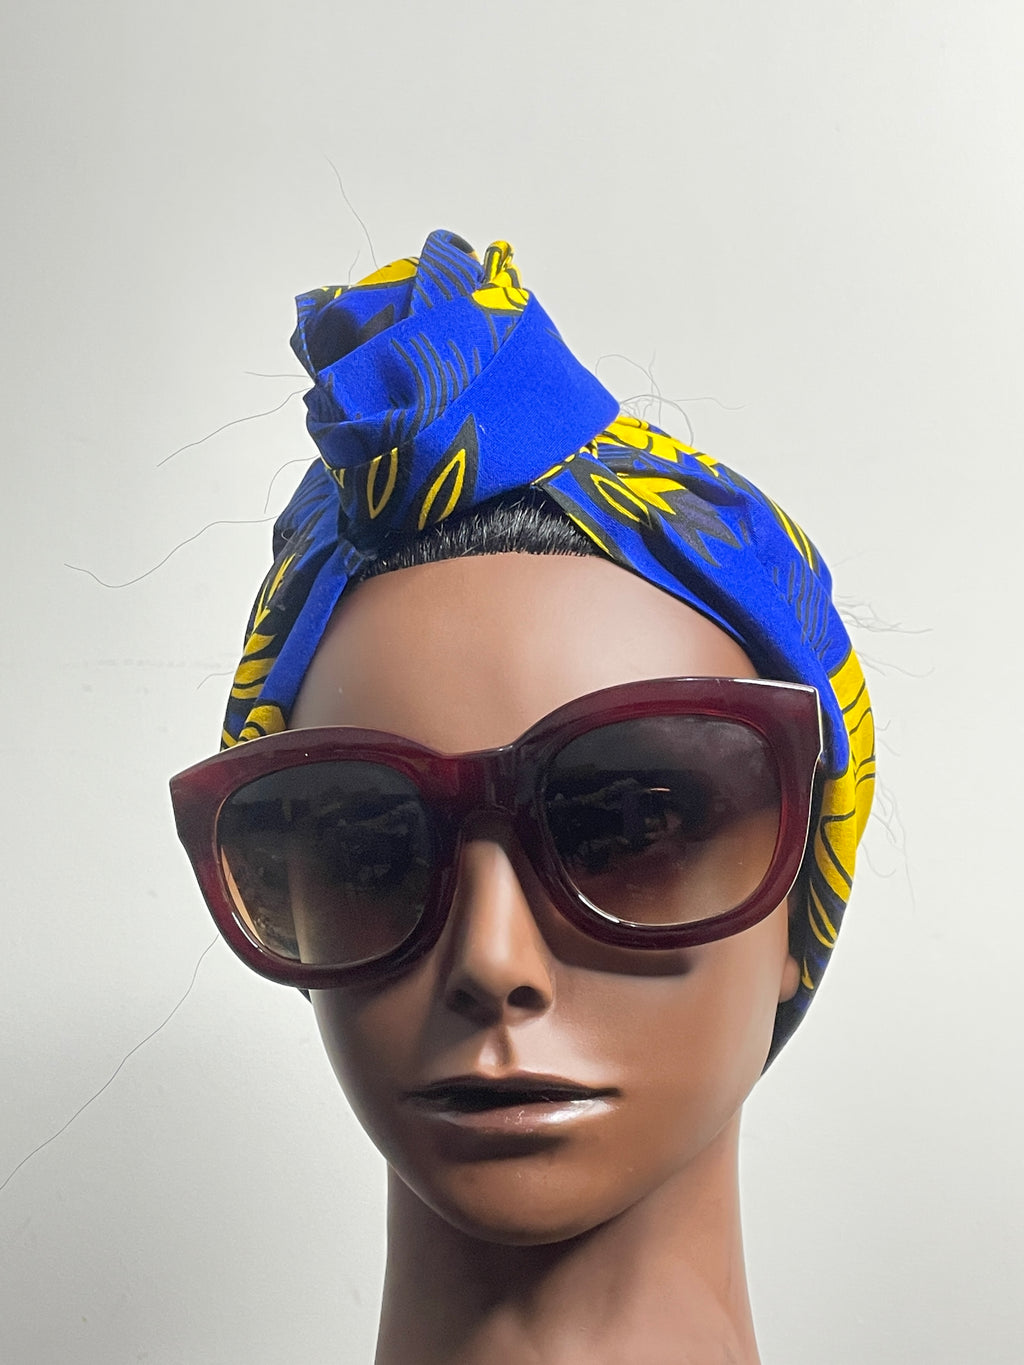 Blue and Yellow Satin Lined Head wrap